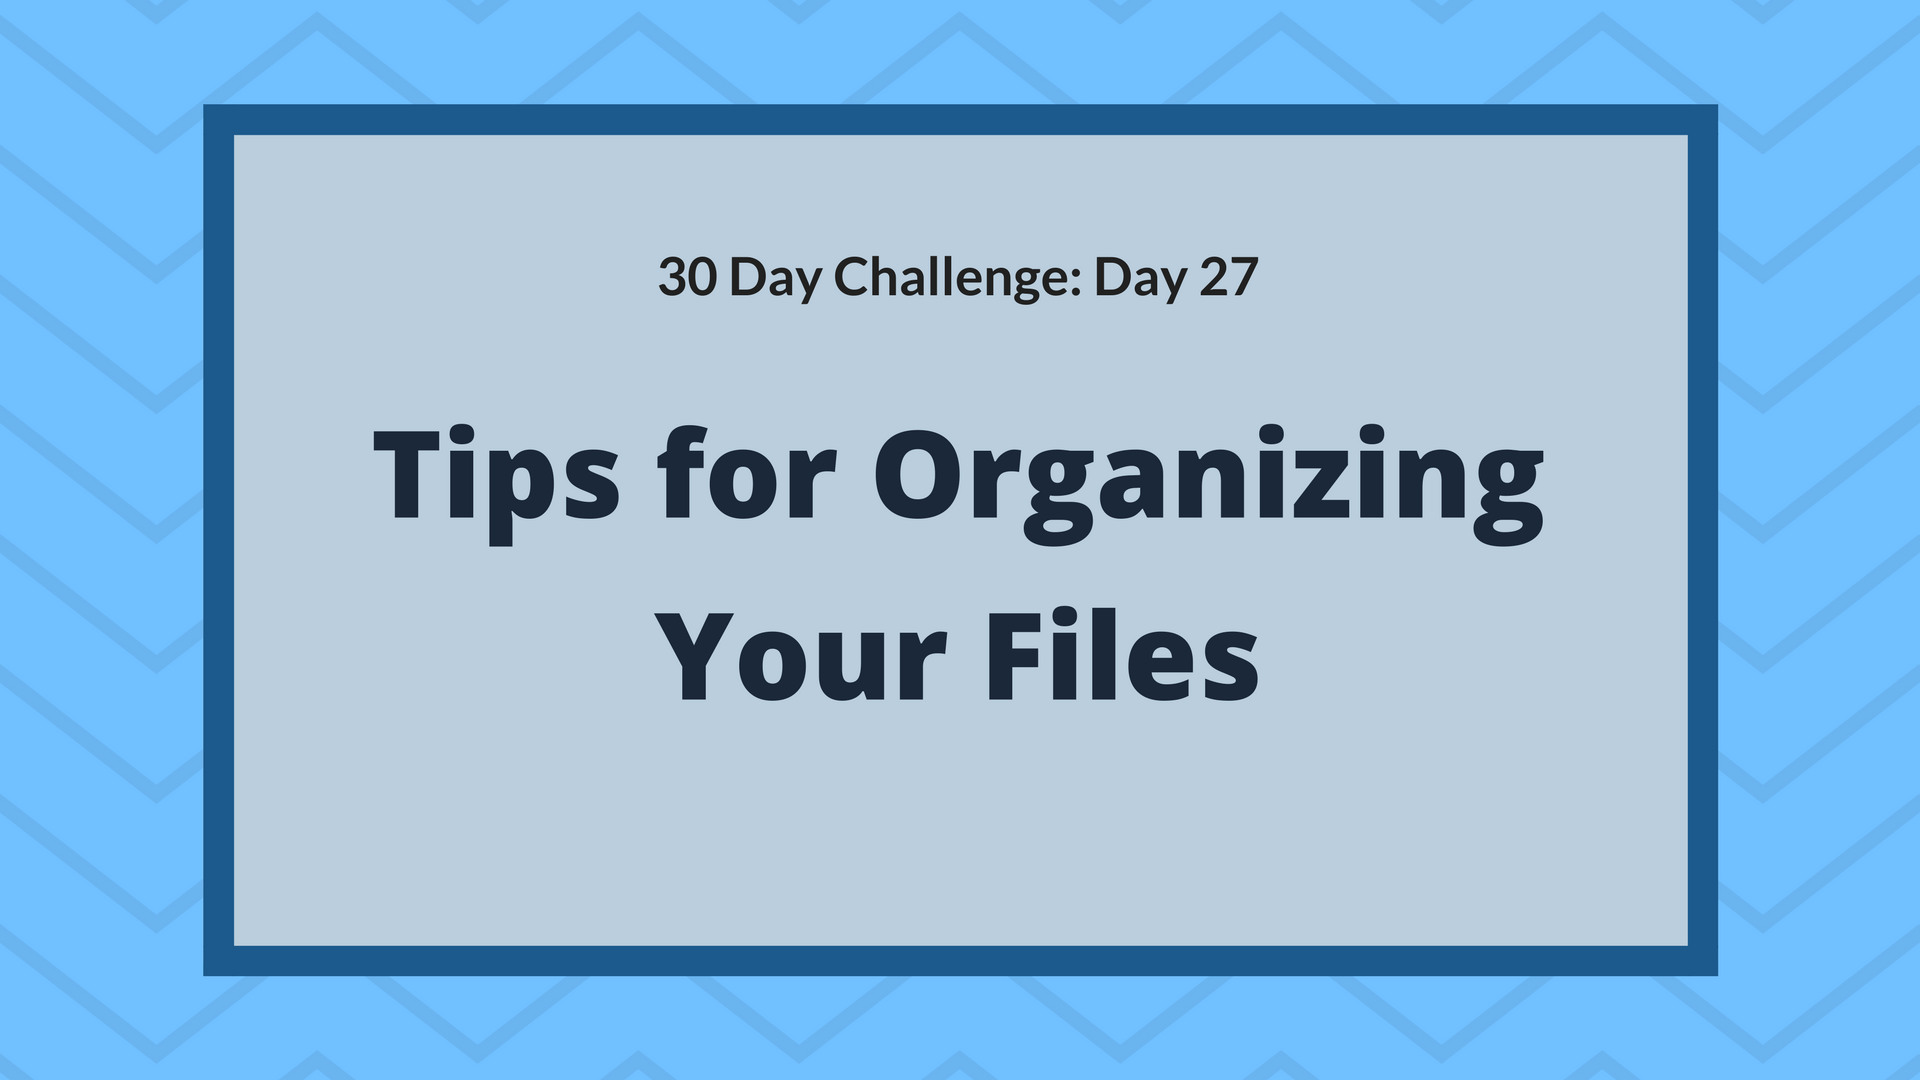 Tips for organizing your files